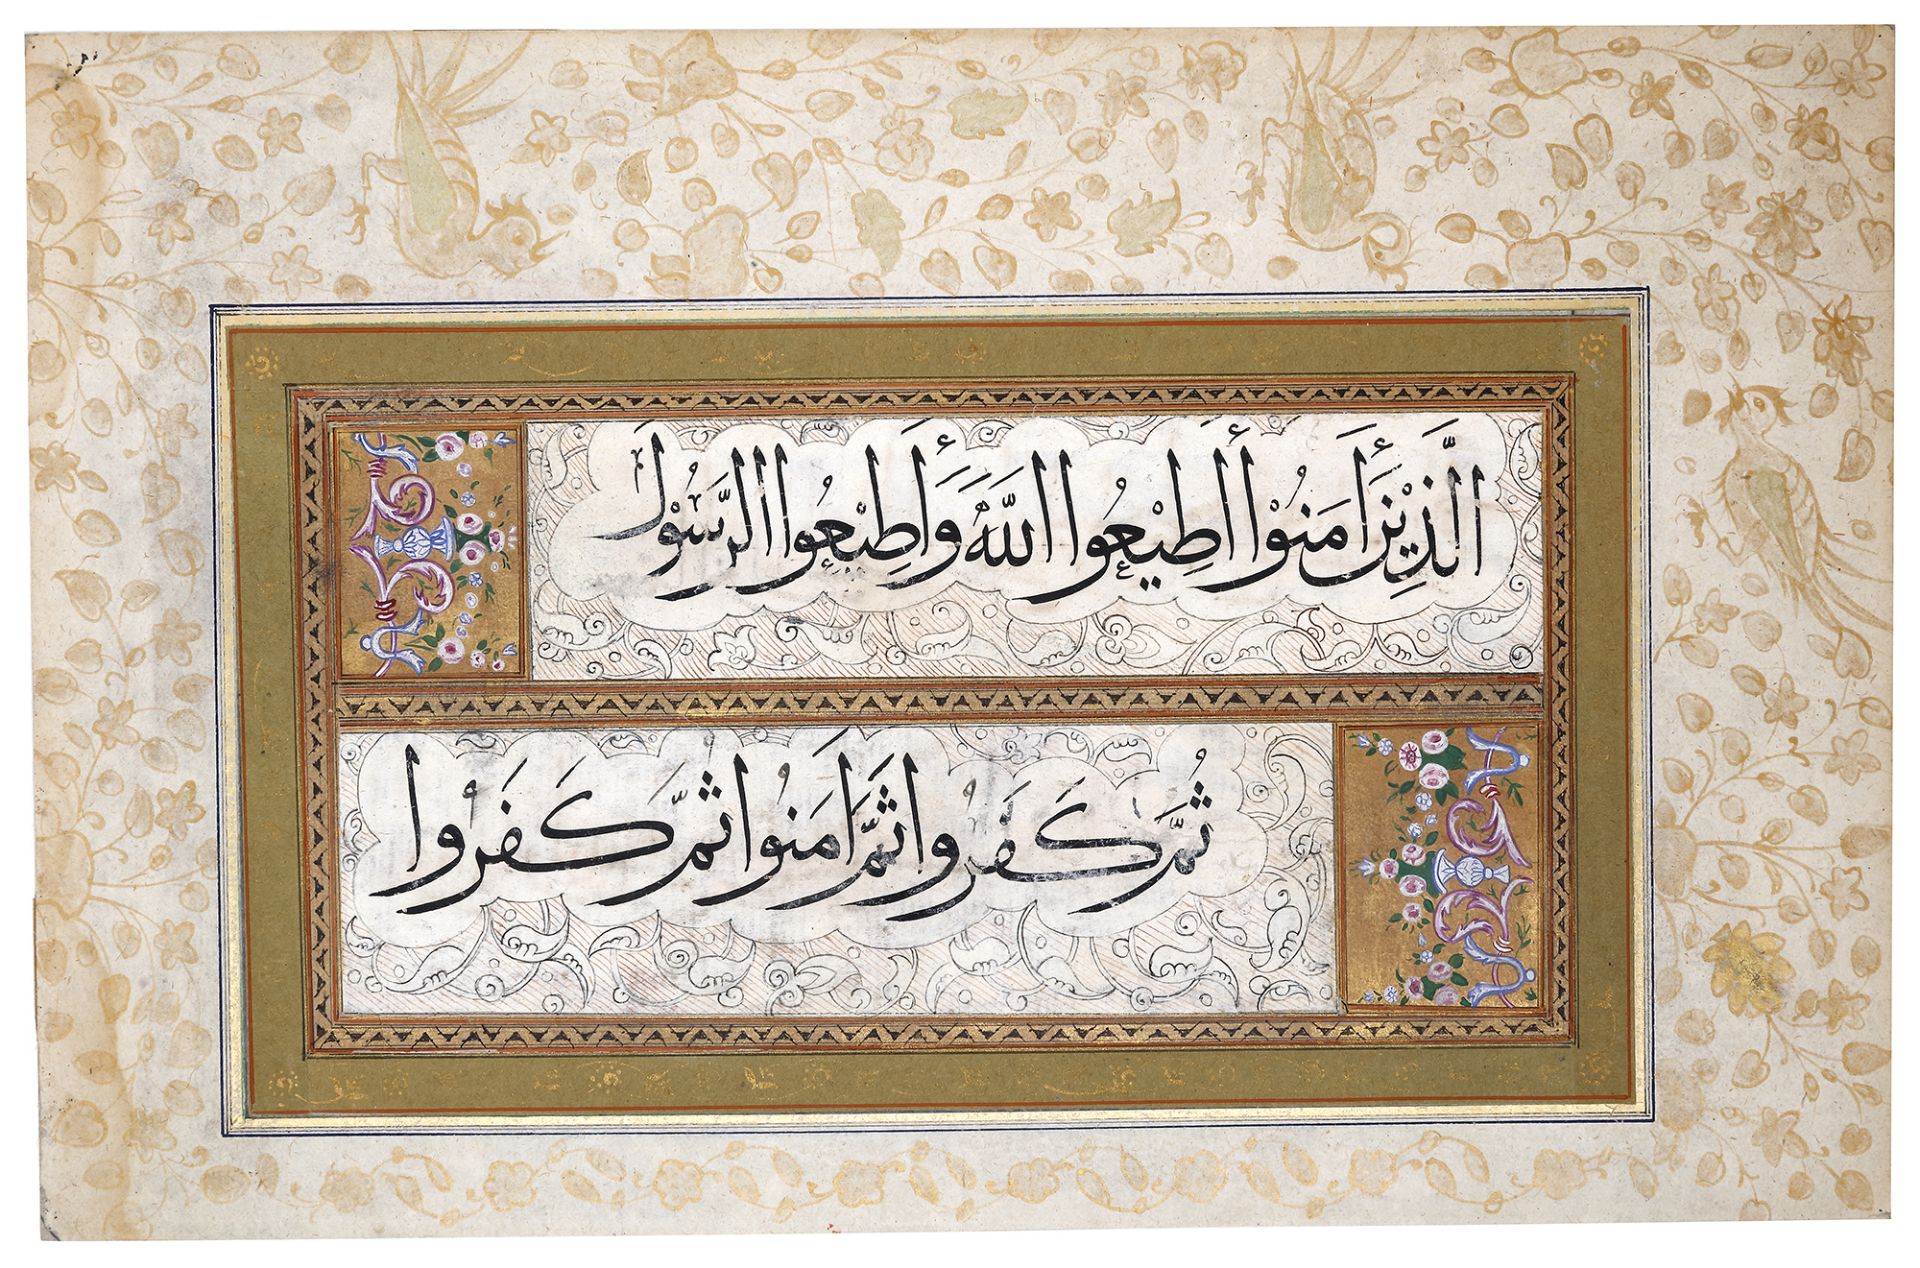 TWO CALLIGRAPHIC ALBUM PAGES WRITTEN IN THULUTH, OTTOMAN TURKEY, 18TH CENTURY - Image 2 of 4